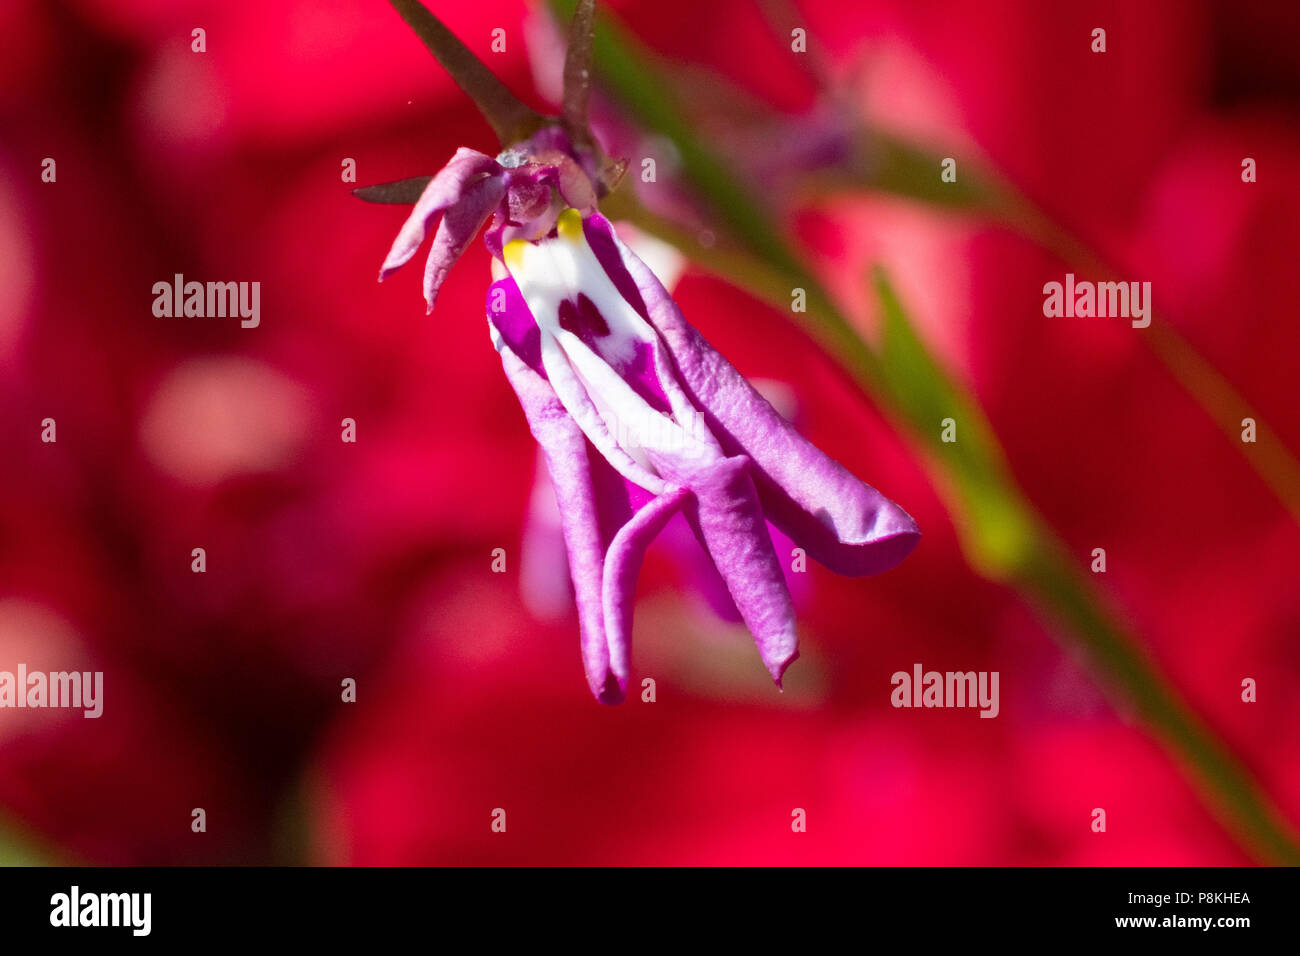 Dryig Lobelia infront of red geraniums makes a striking image of colour and shapes Stock Photo